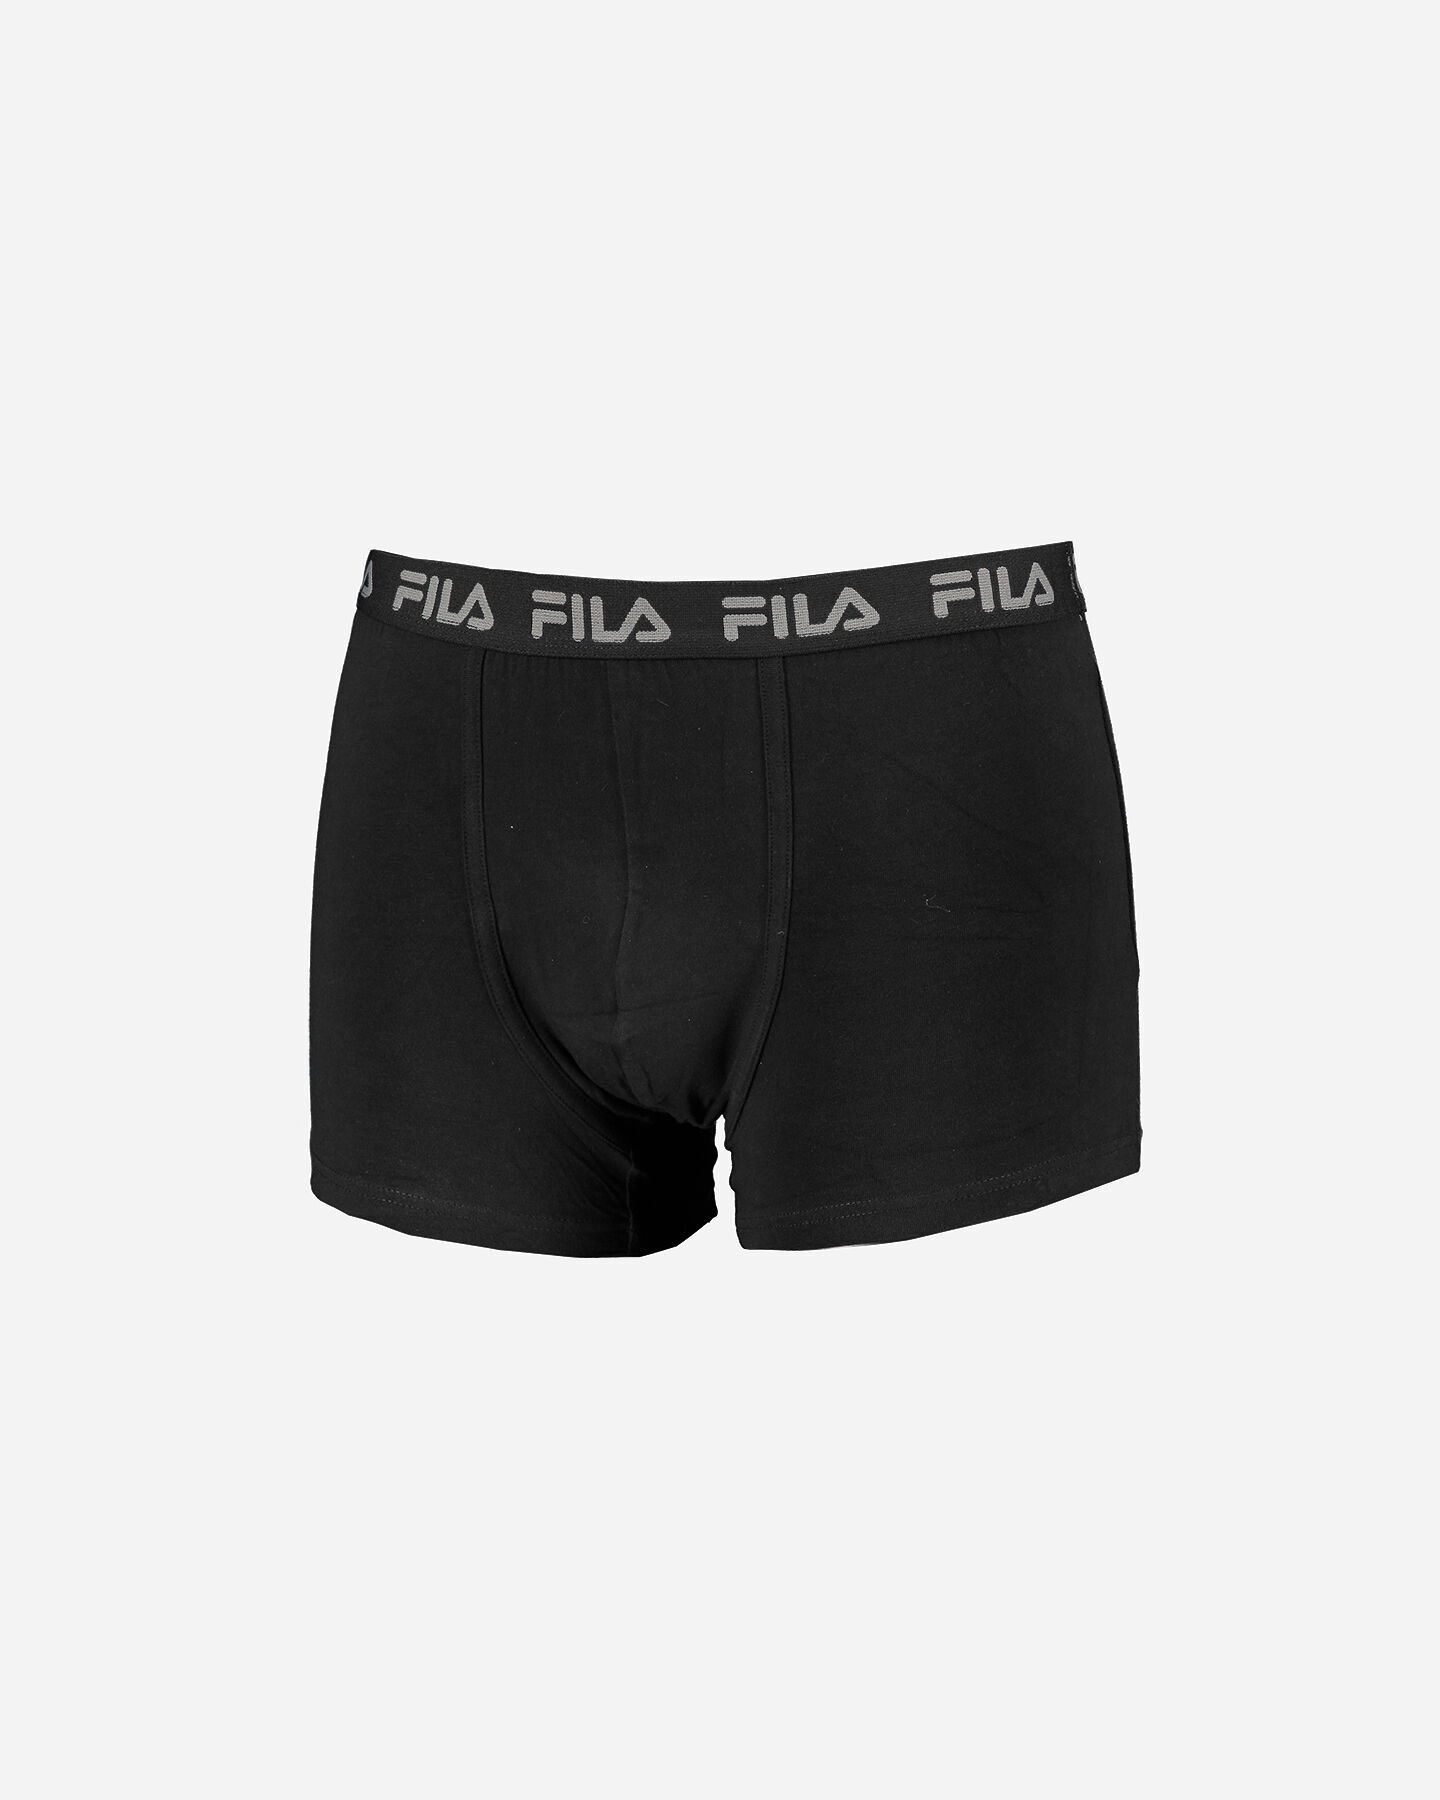  Intimo FILA 2PACK BOXER PLACED LOGO M S4089016|200|M scatto 1